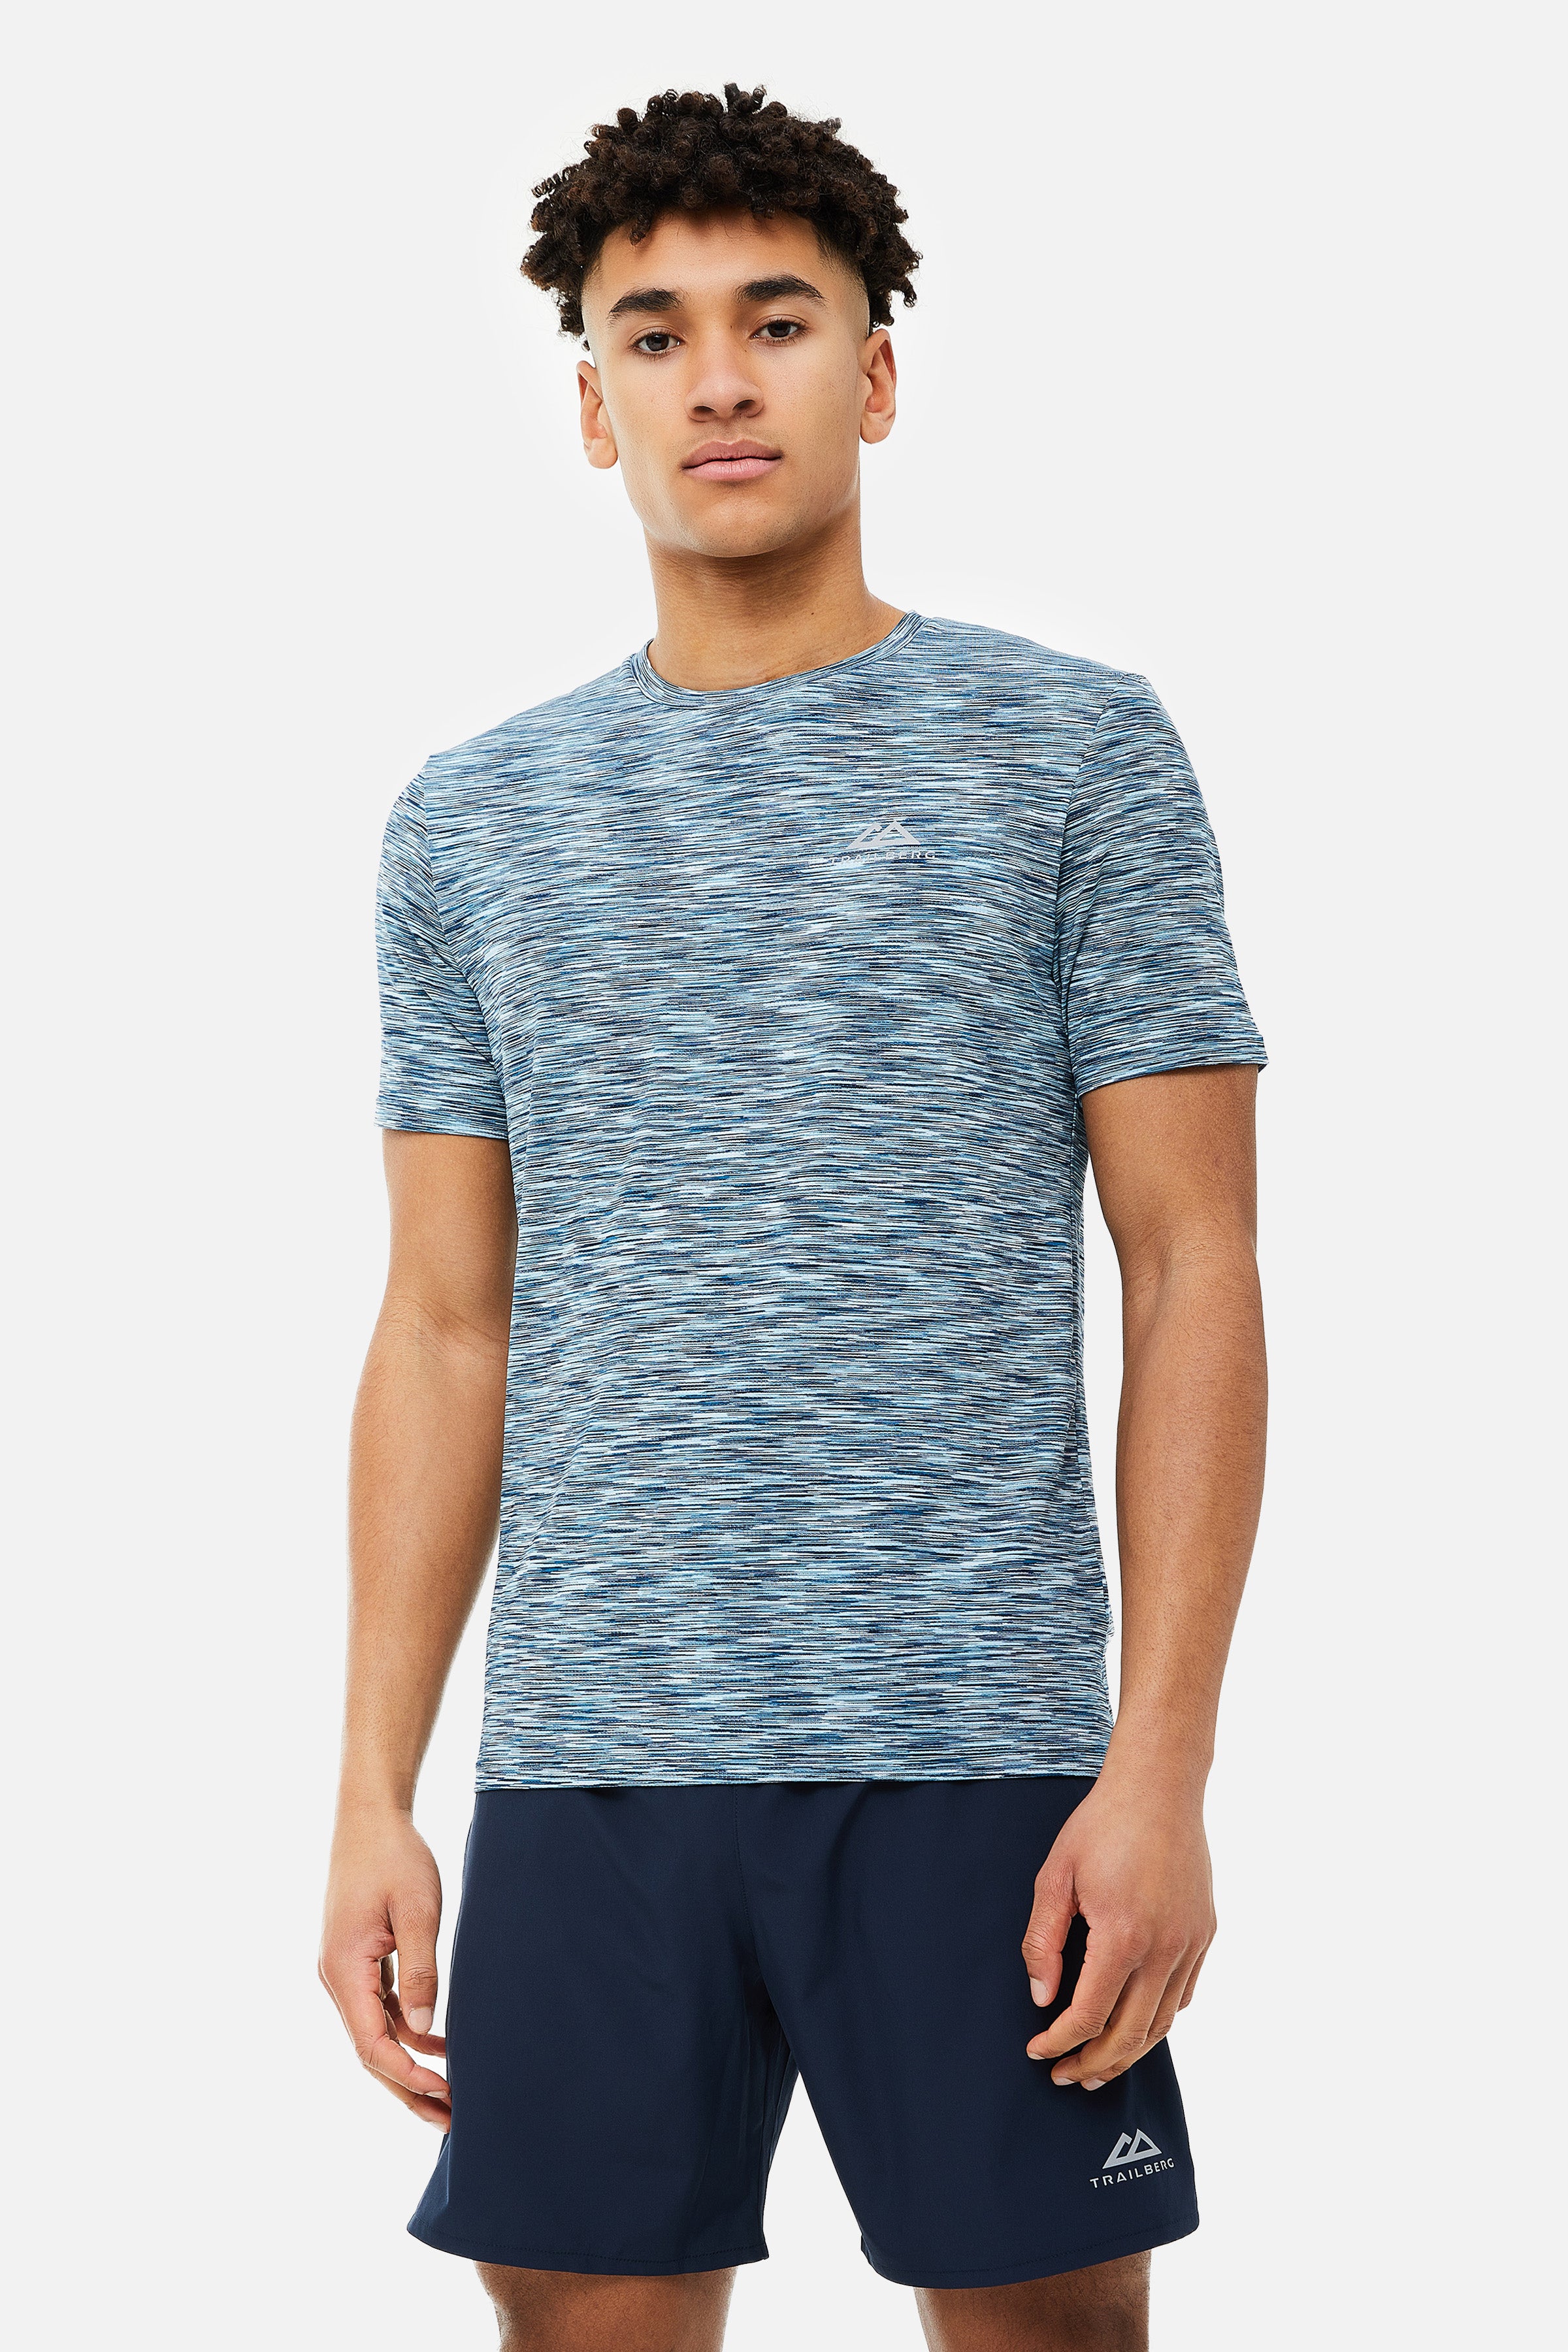 SPACE SS24 TEE - BLUE